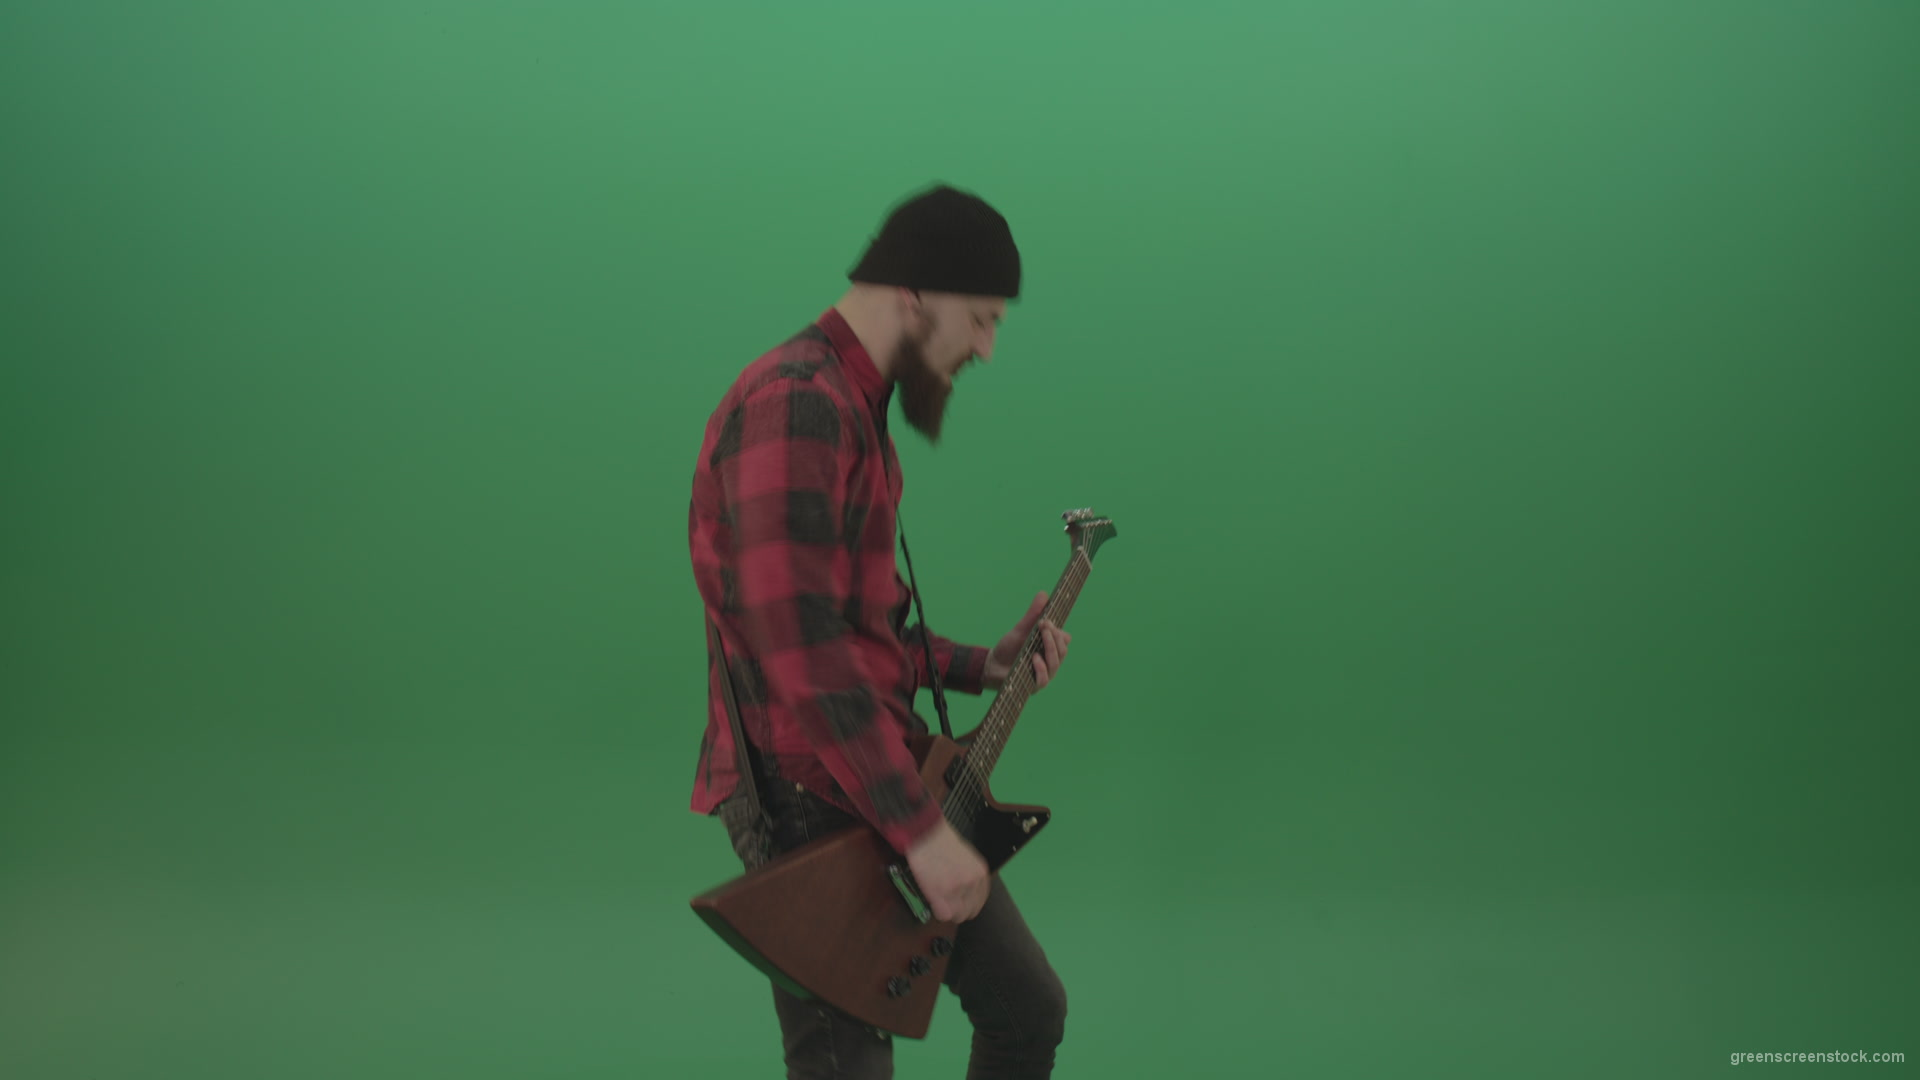 Young-man-with-beard-play-hardcore-music-on-guitar-in-side-view-on-green-screen-chromakey-background_006 Green Screen Stock